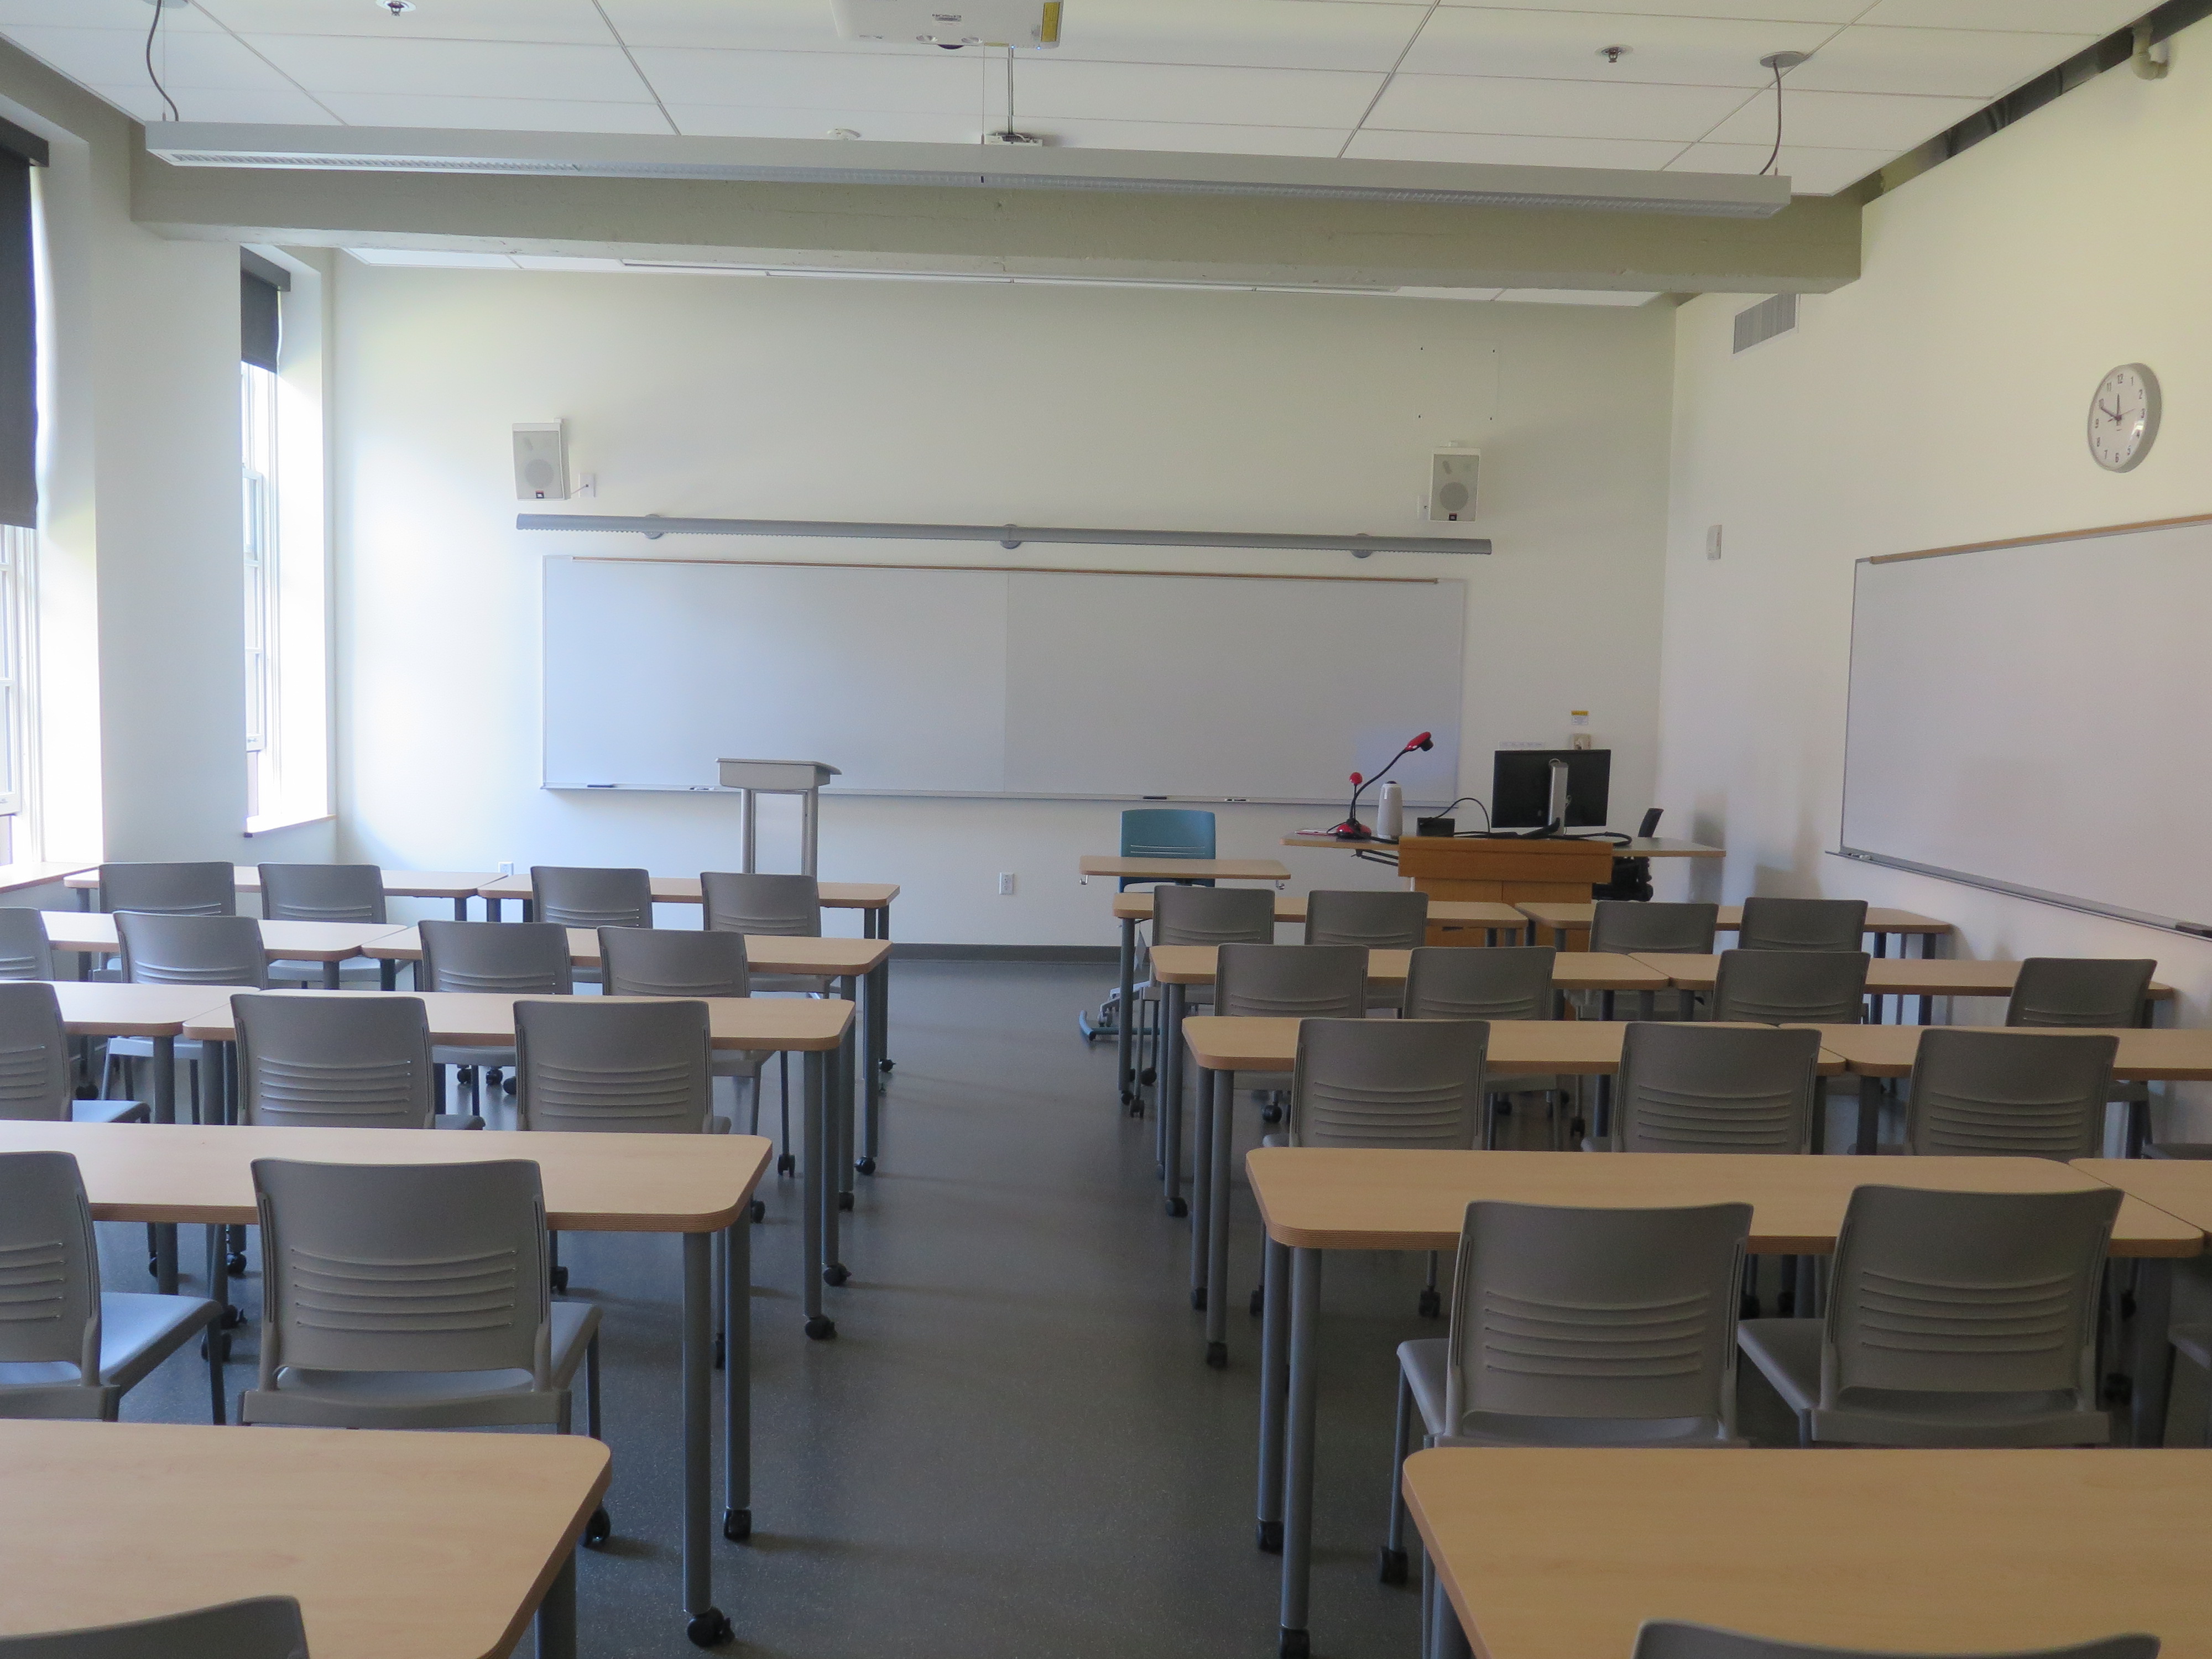 Room Consists of hard floors, moveable tables and chairs, a white board and podium are both located at the front of the room with another white board located on the right outer wall of the room.